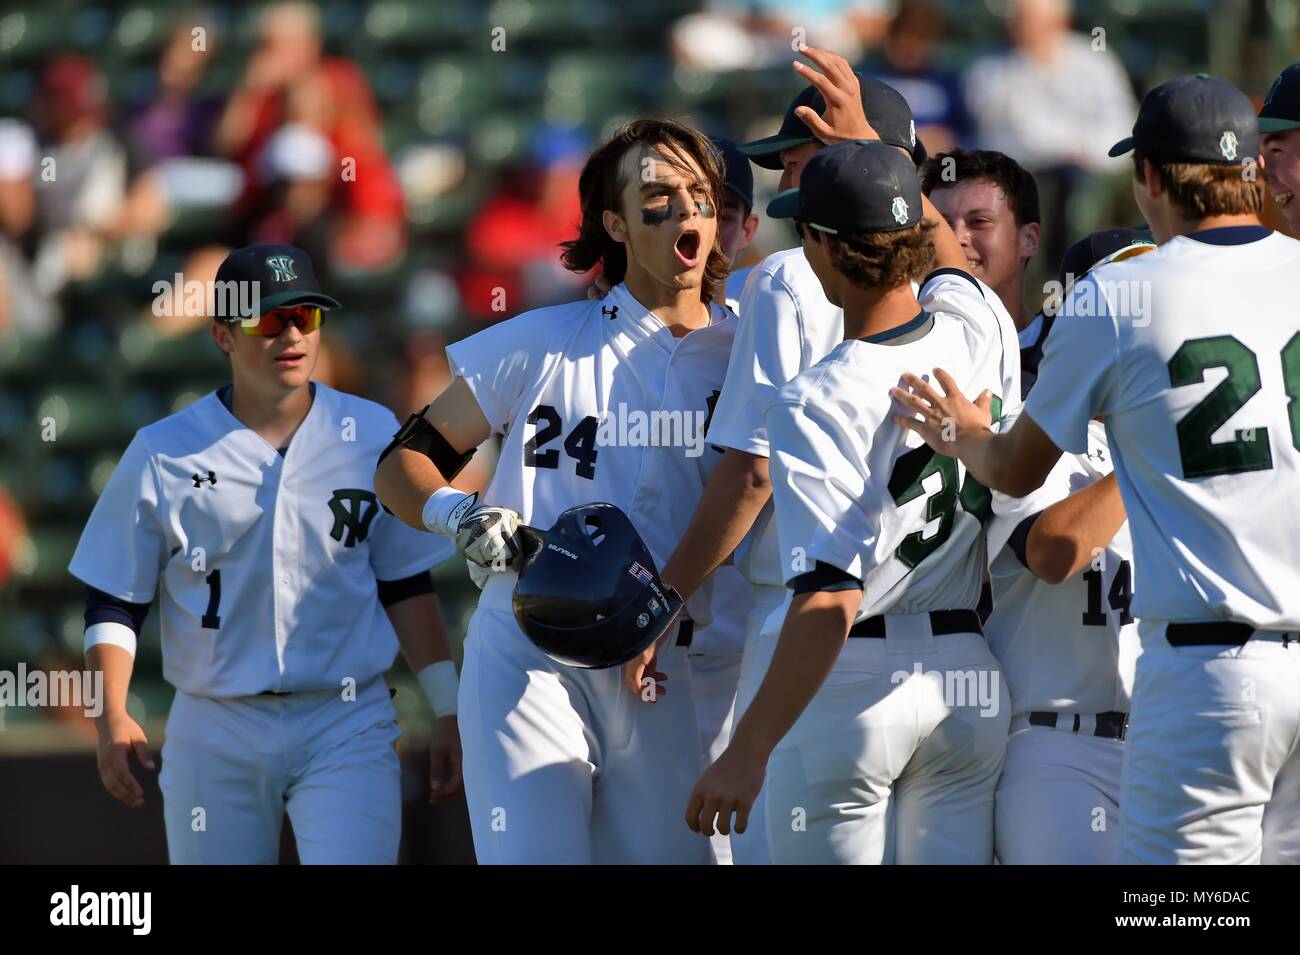 Teammates greet and congratulate player at the plate following his home run. USA. Stock Photo